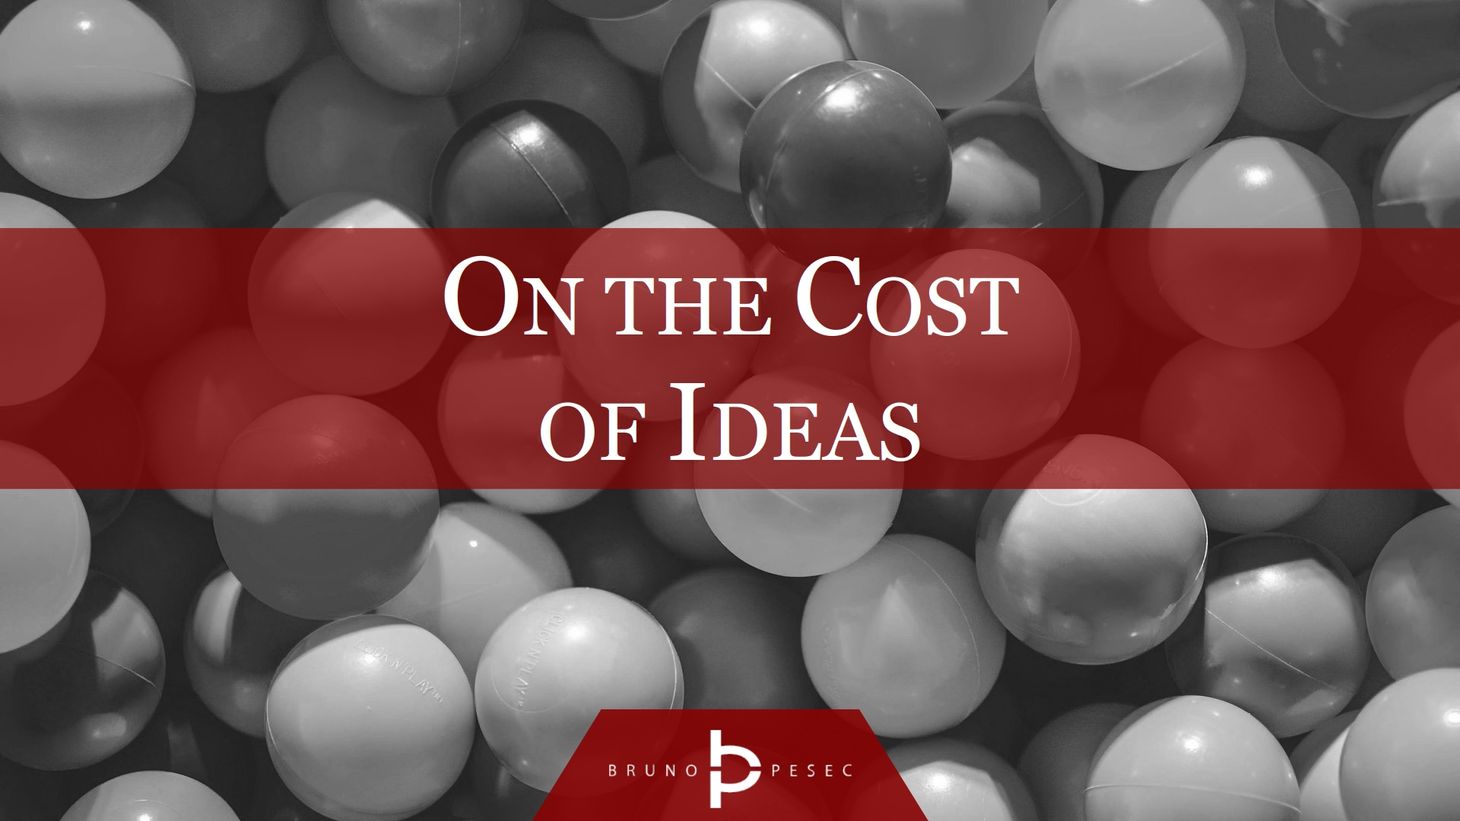 On the cost of ideas